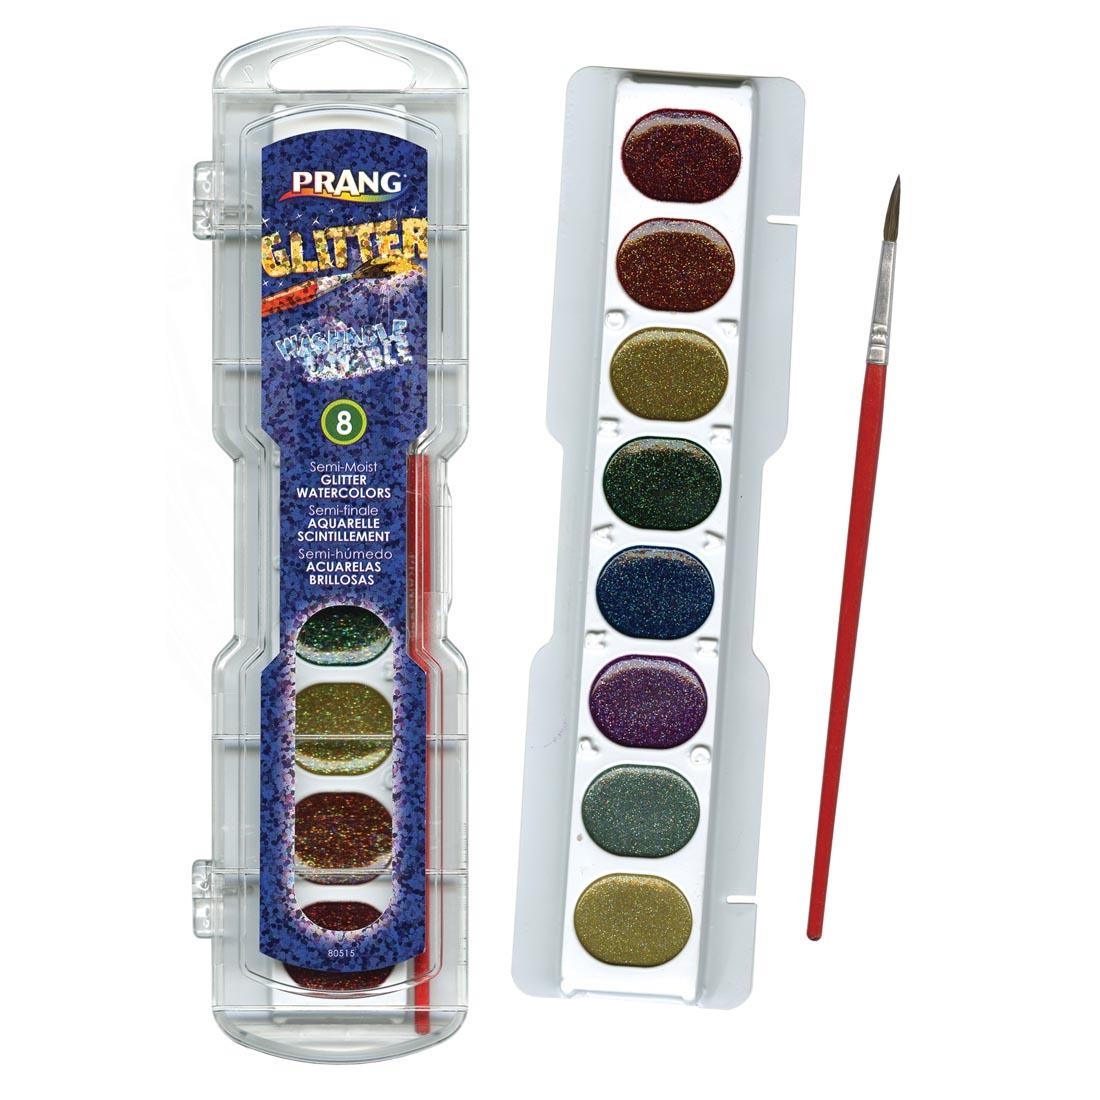 Prang Washable Watercolors Glitter Set Shown Both With Package Closed and Open With Brush